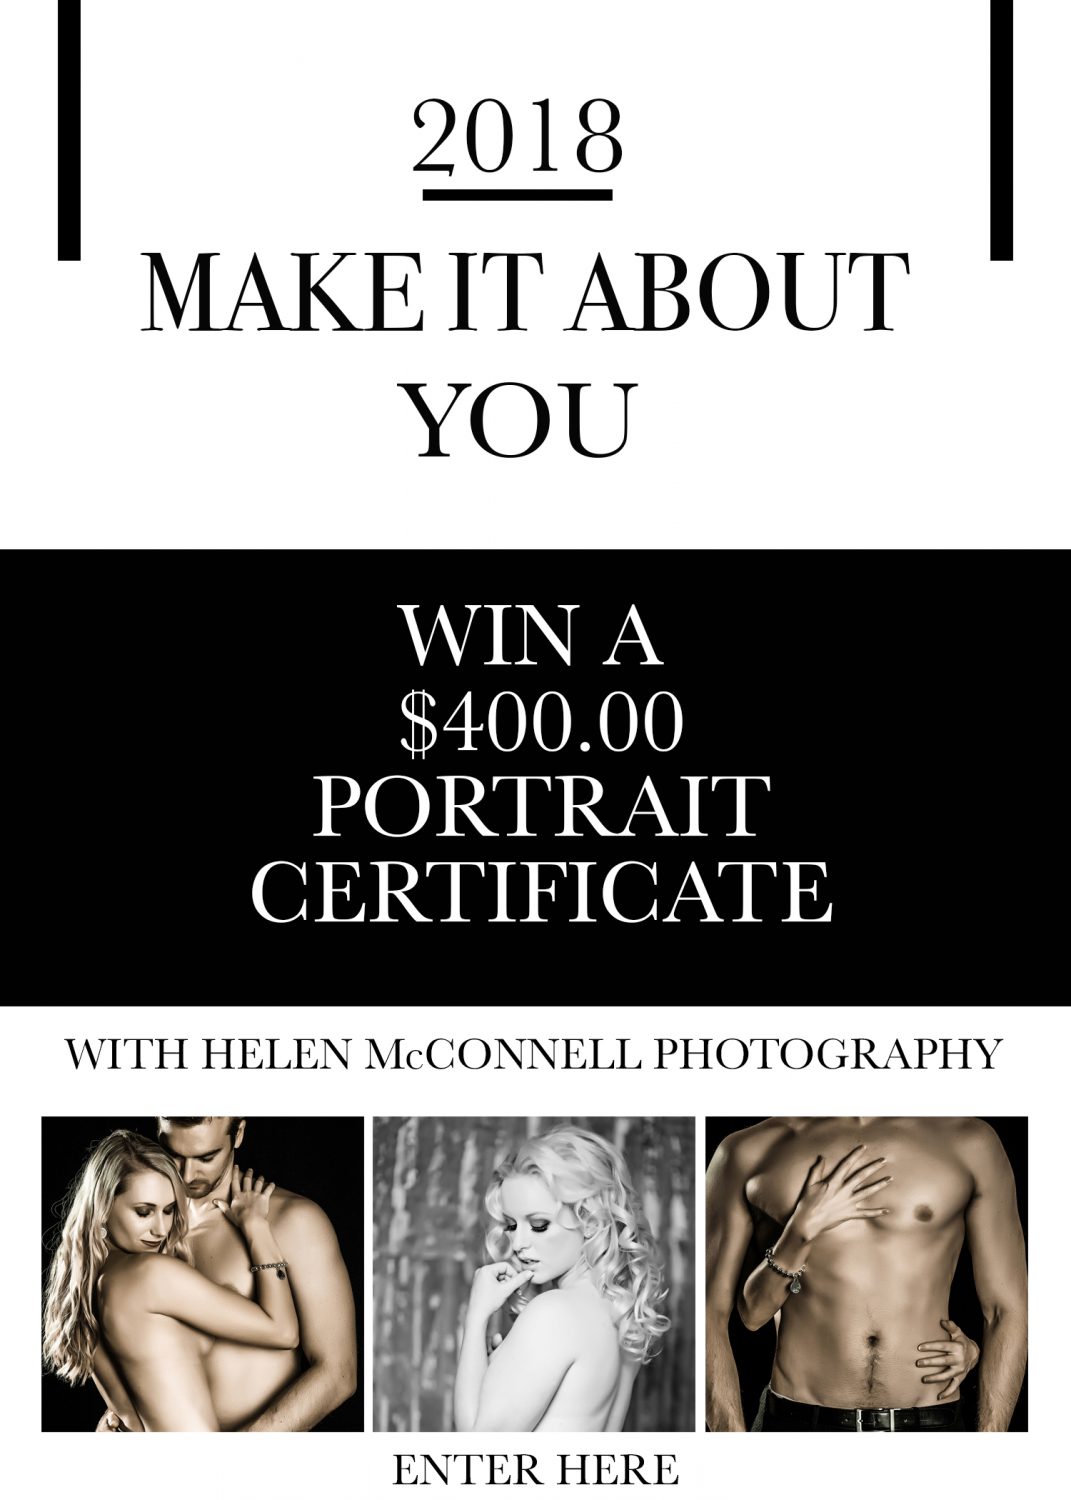 photography competition